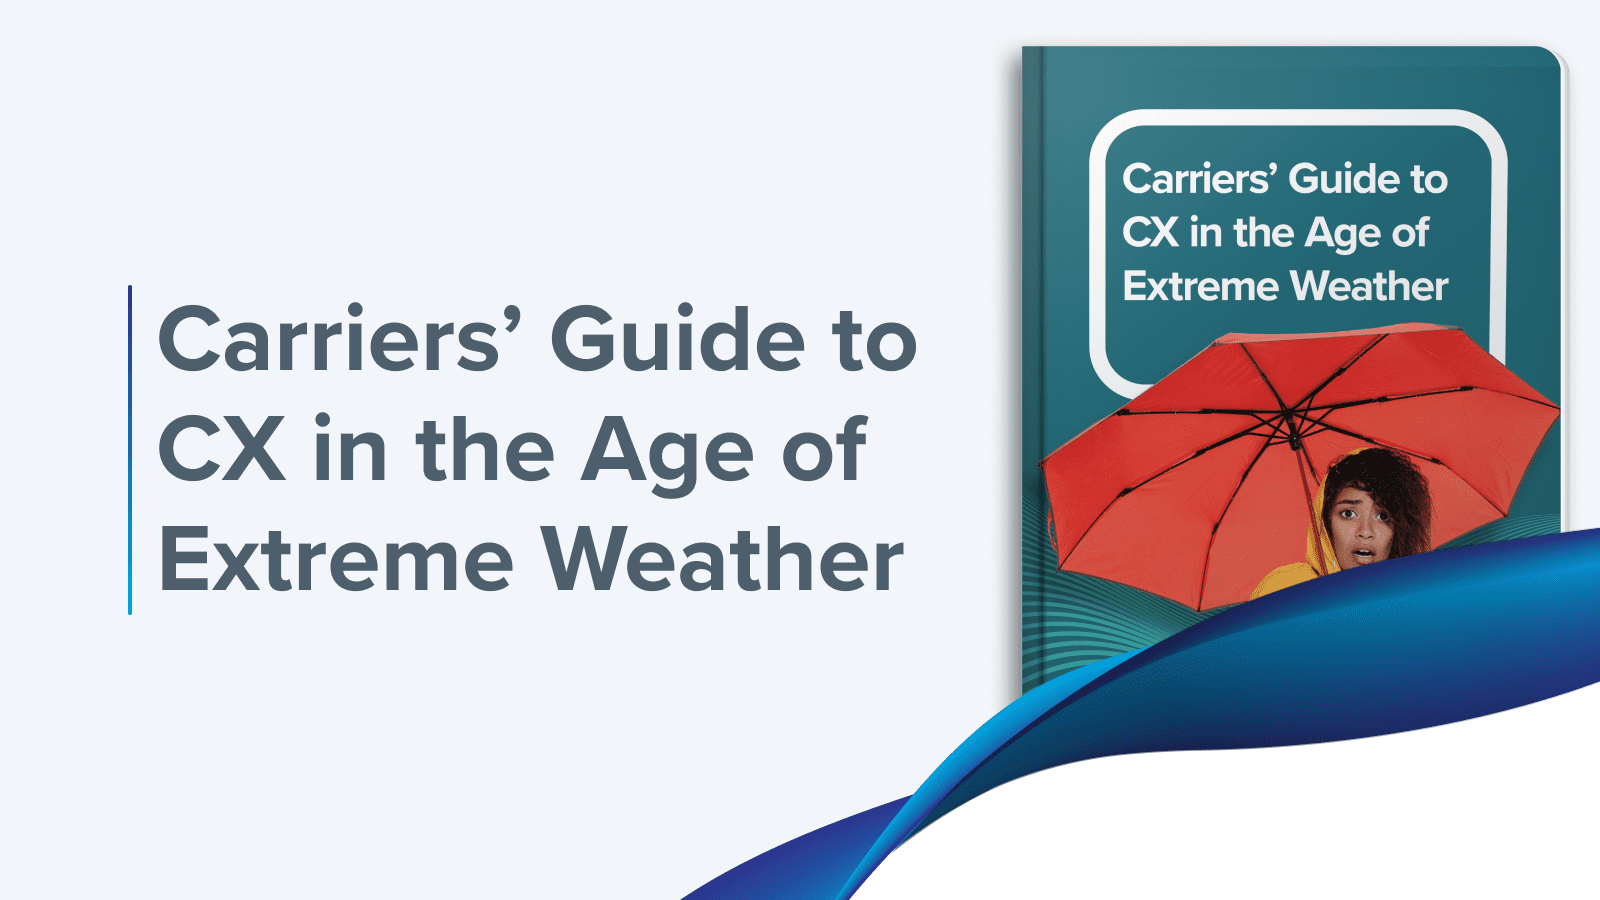 Carriers' Guide to CX in the Age of Extreme Weather